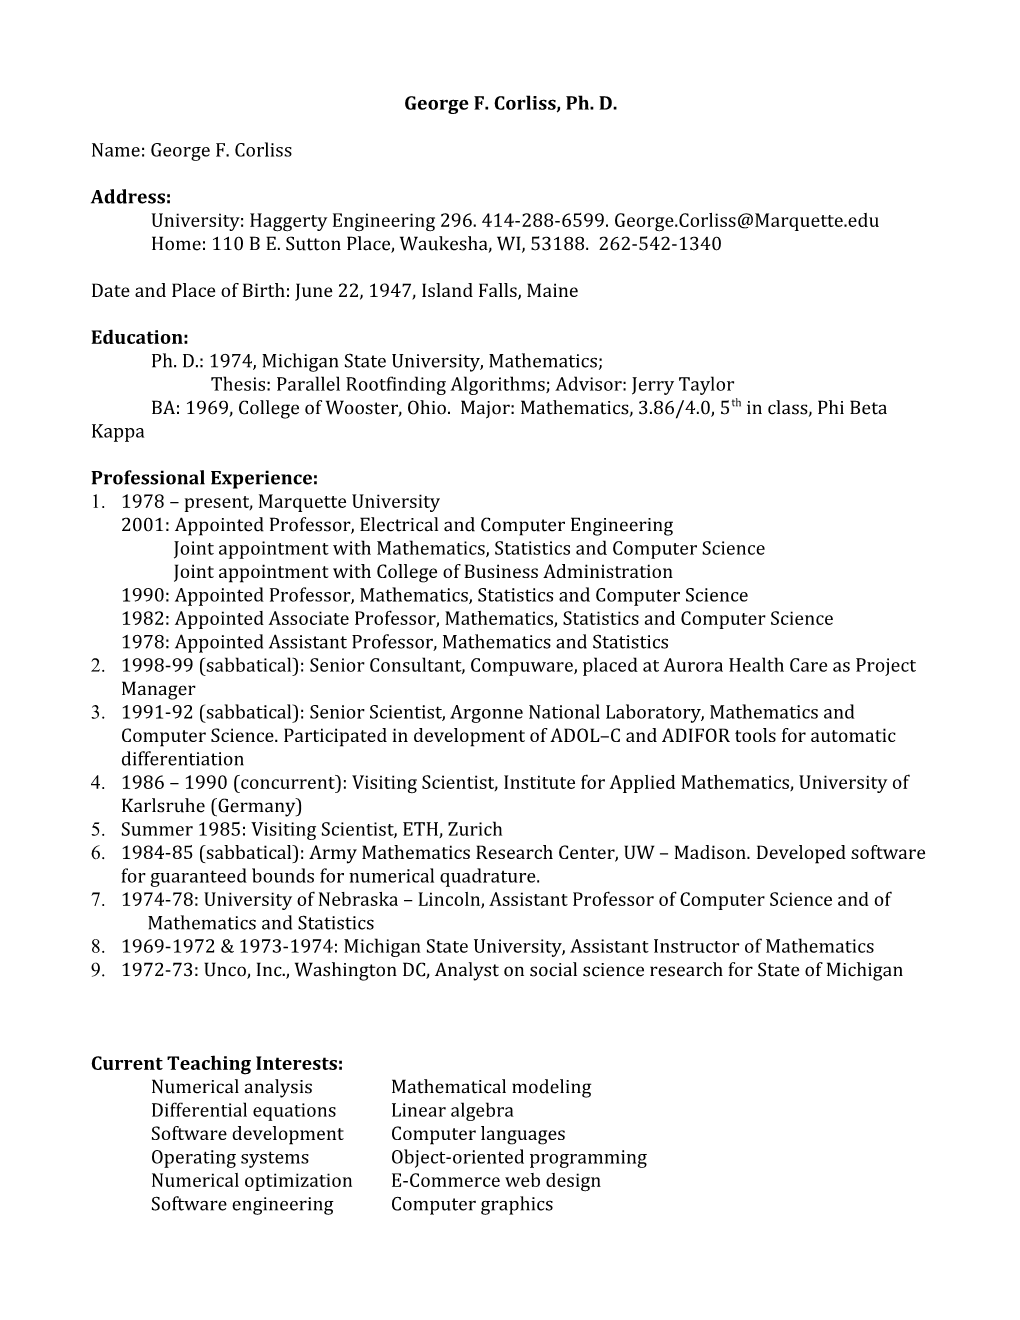 Suggested Format for Curriculum Vitae